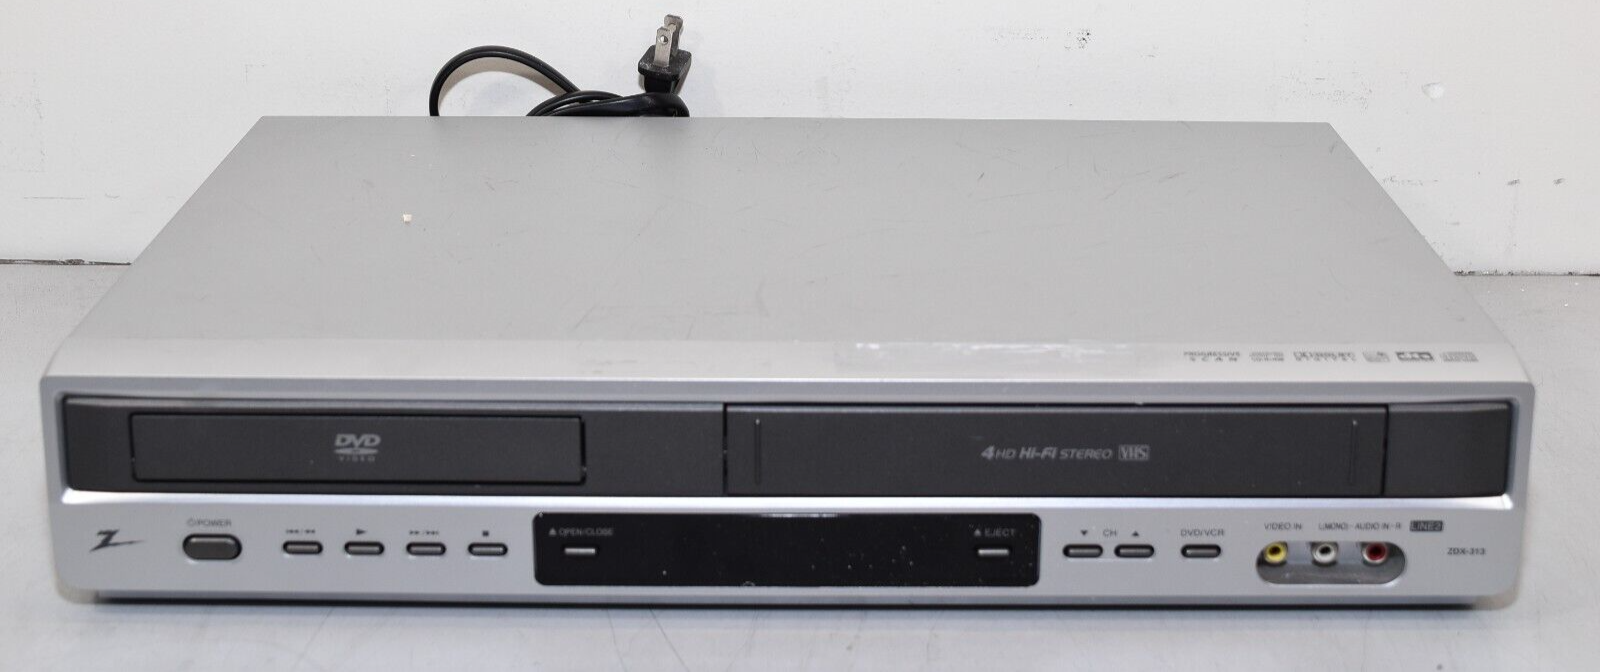 Zenith ZDX-313 DVD/VCR Combo Player *NO REMOTE*